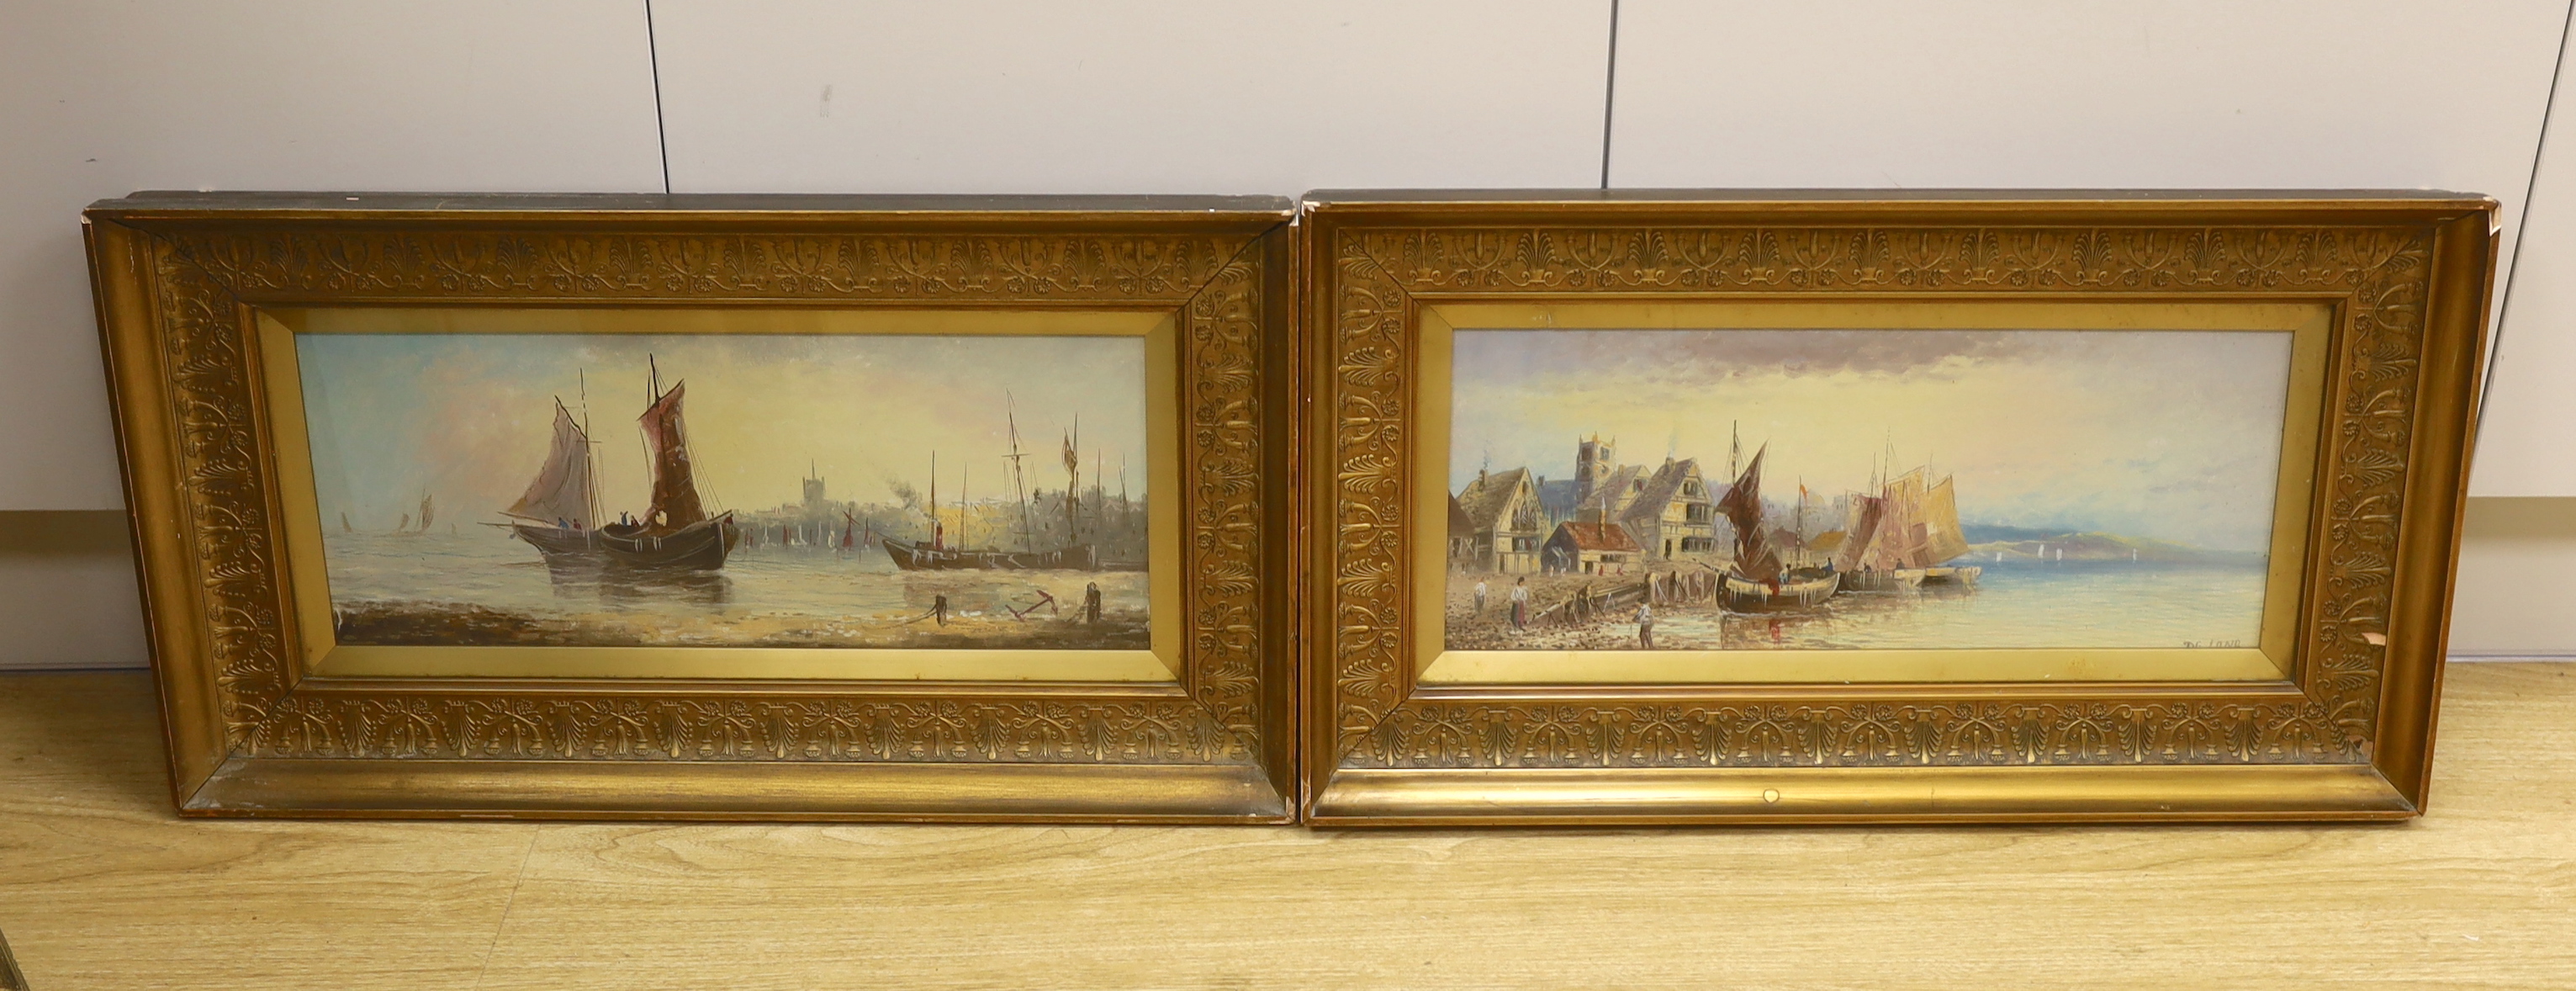 19th century, Continental School, pair of oils on board, Coastal scenes with moored fishing boats, one indistinctly signed, partially obscured by the mount, 18 x 46cm, ornate gilt framed